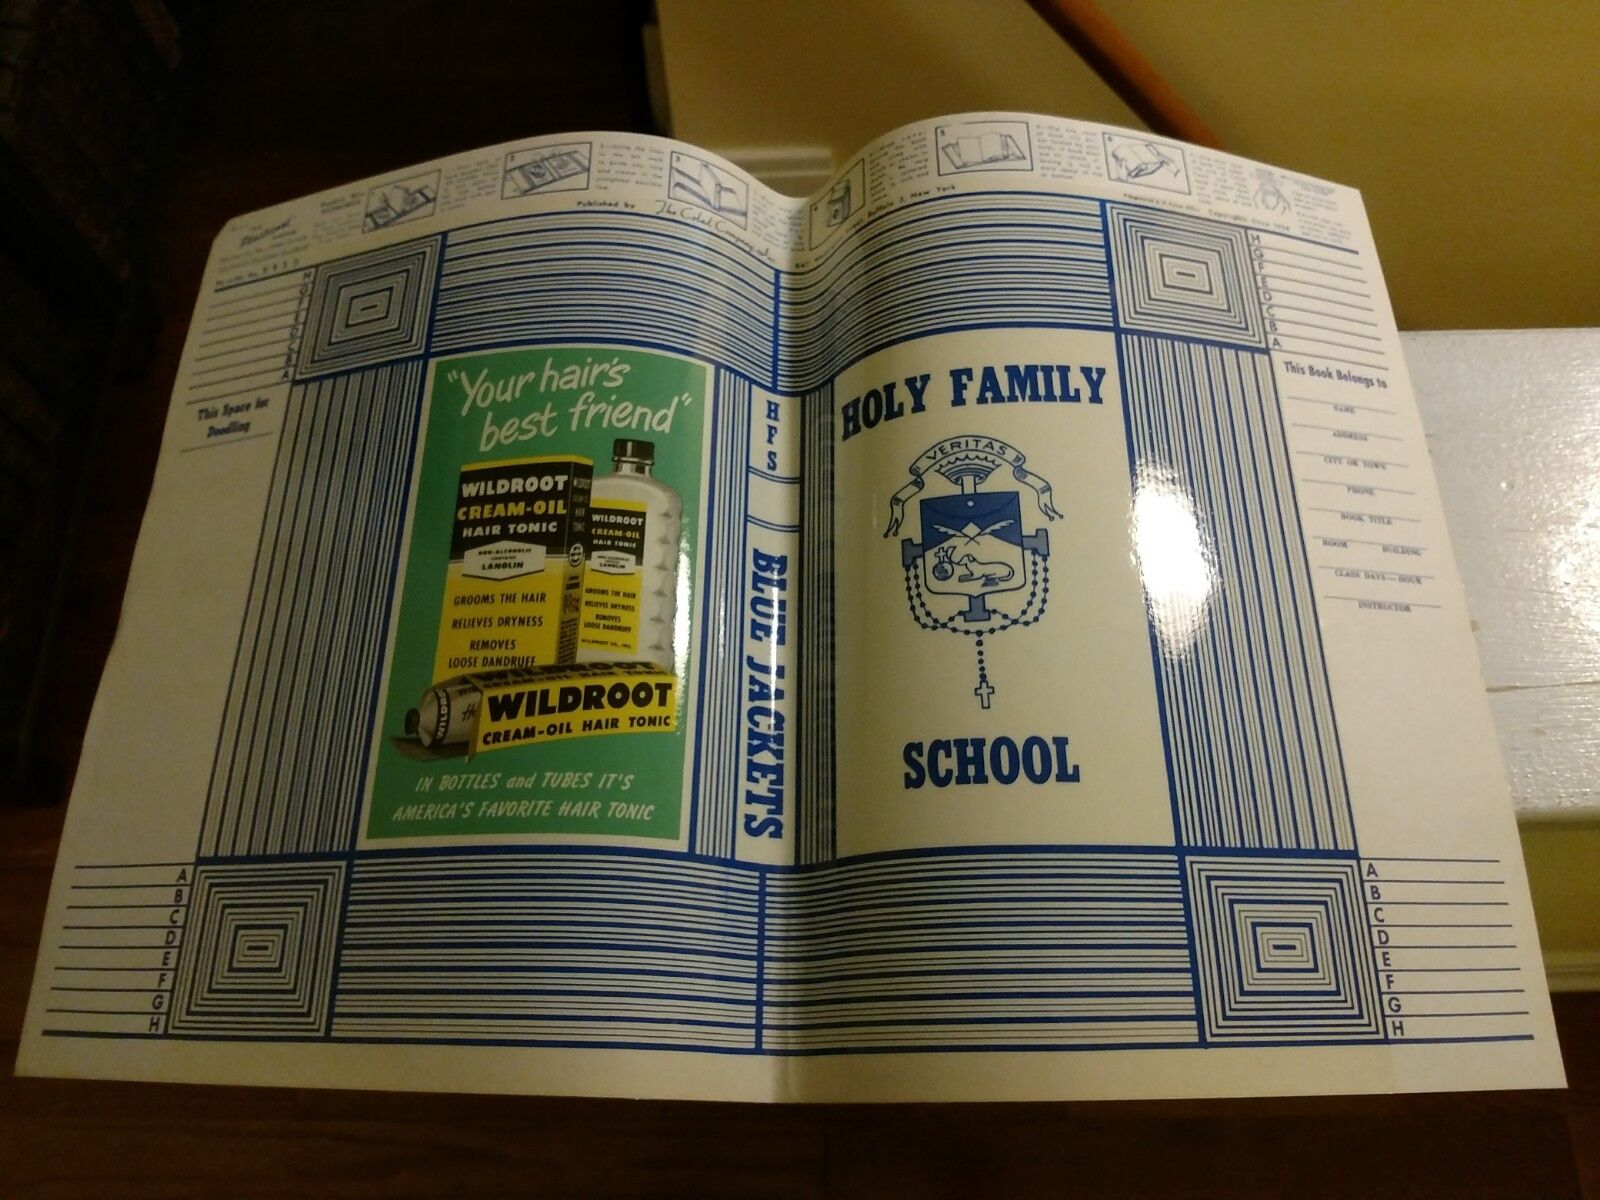 1940s Unused Holy Family School BLUE JACKETS Book Cover / Wild Root Hair Tonic